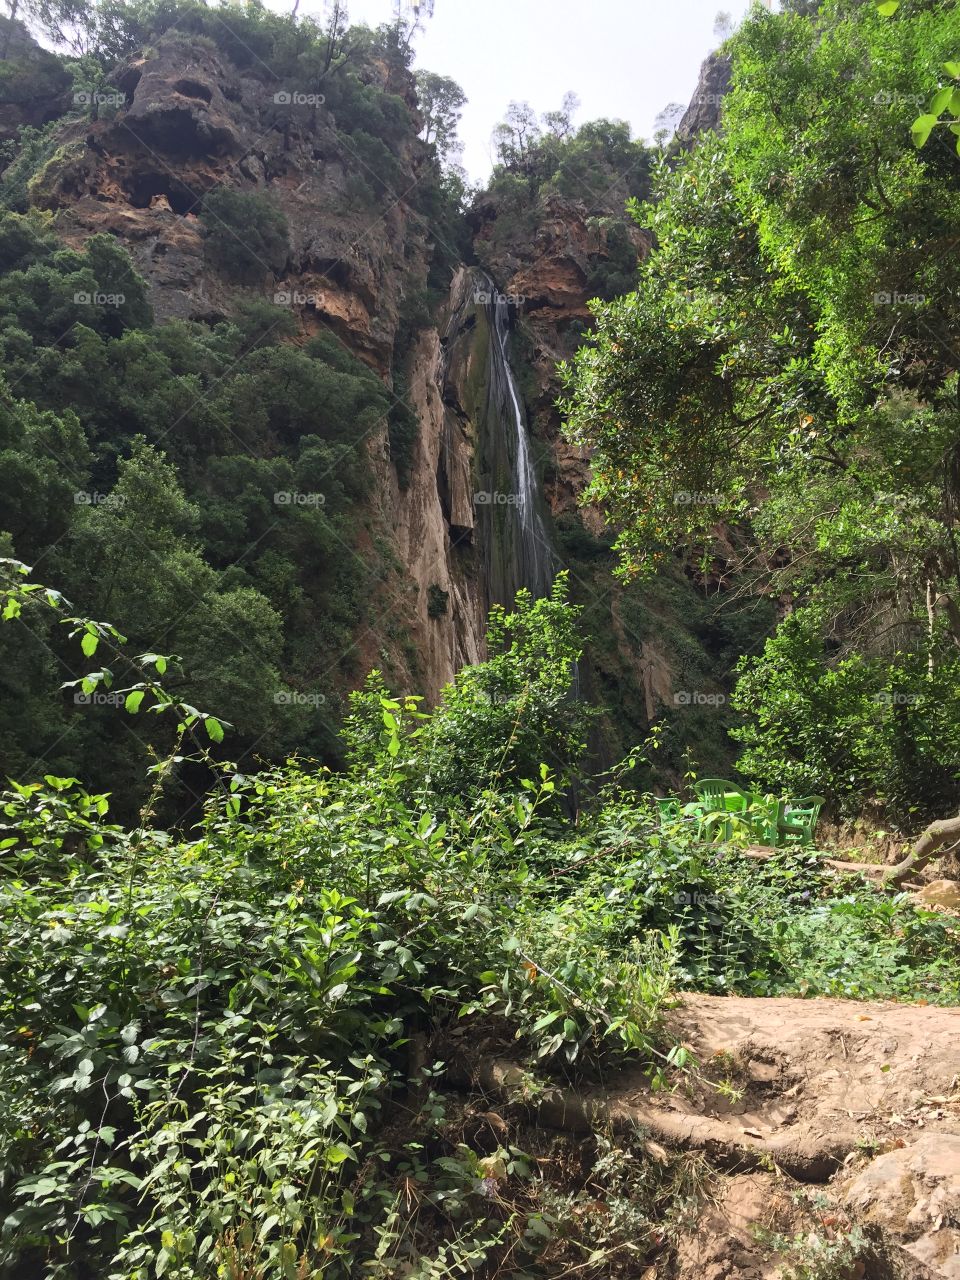 The source of a cascade waterfall Akchour Chefchaouen Morocco 